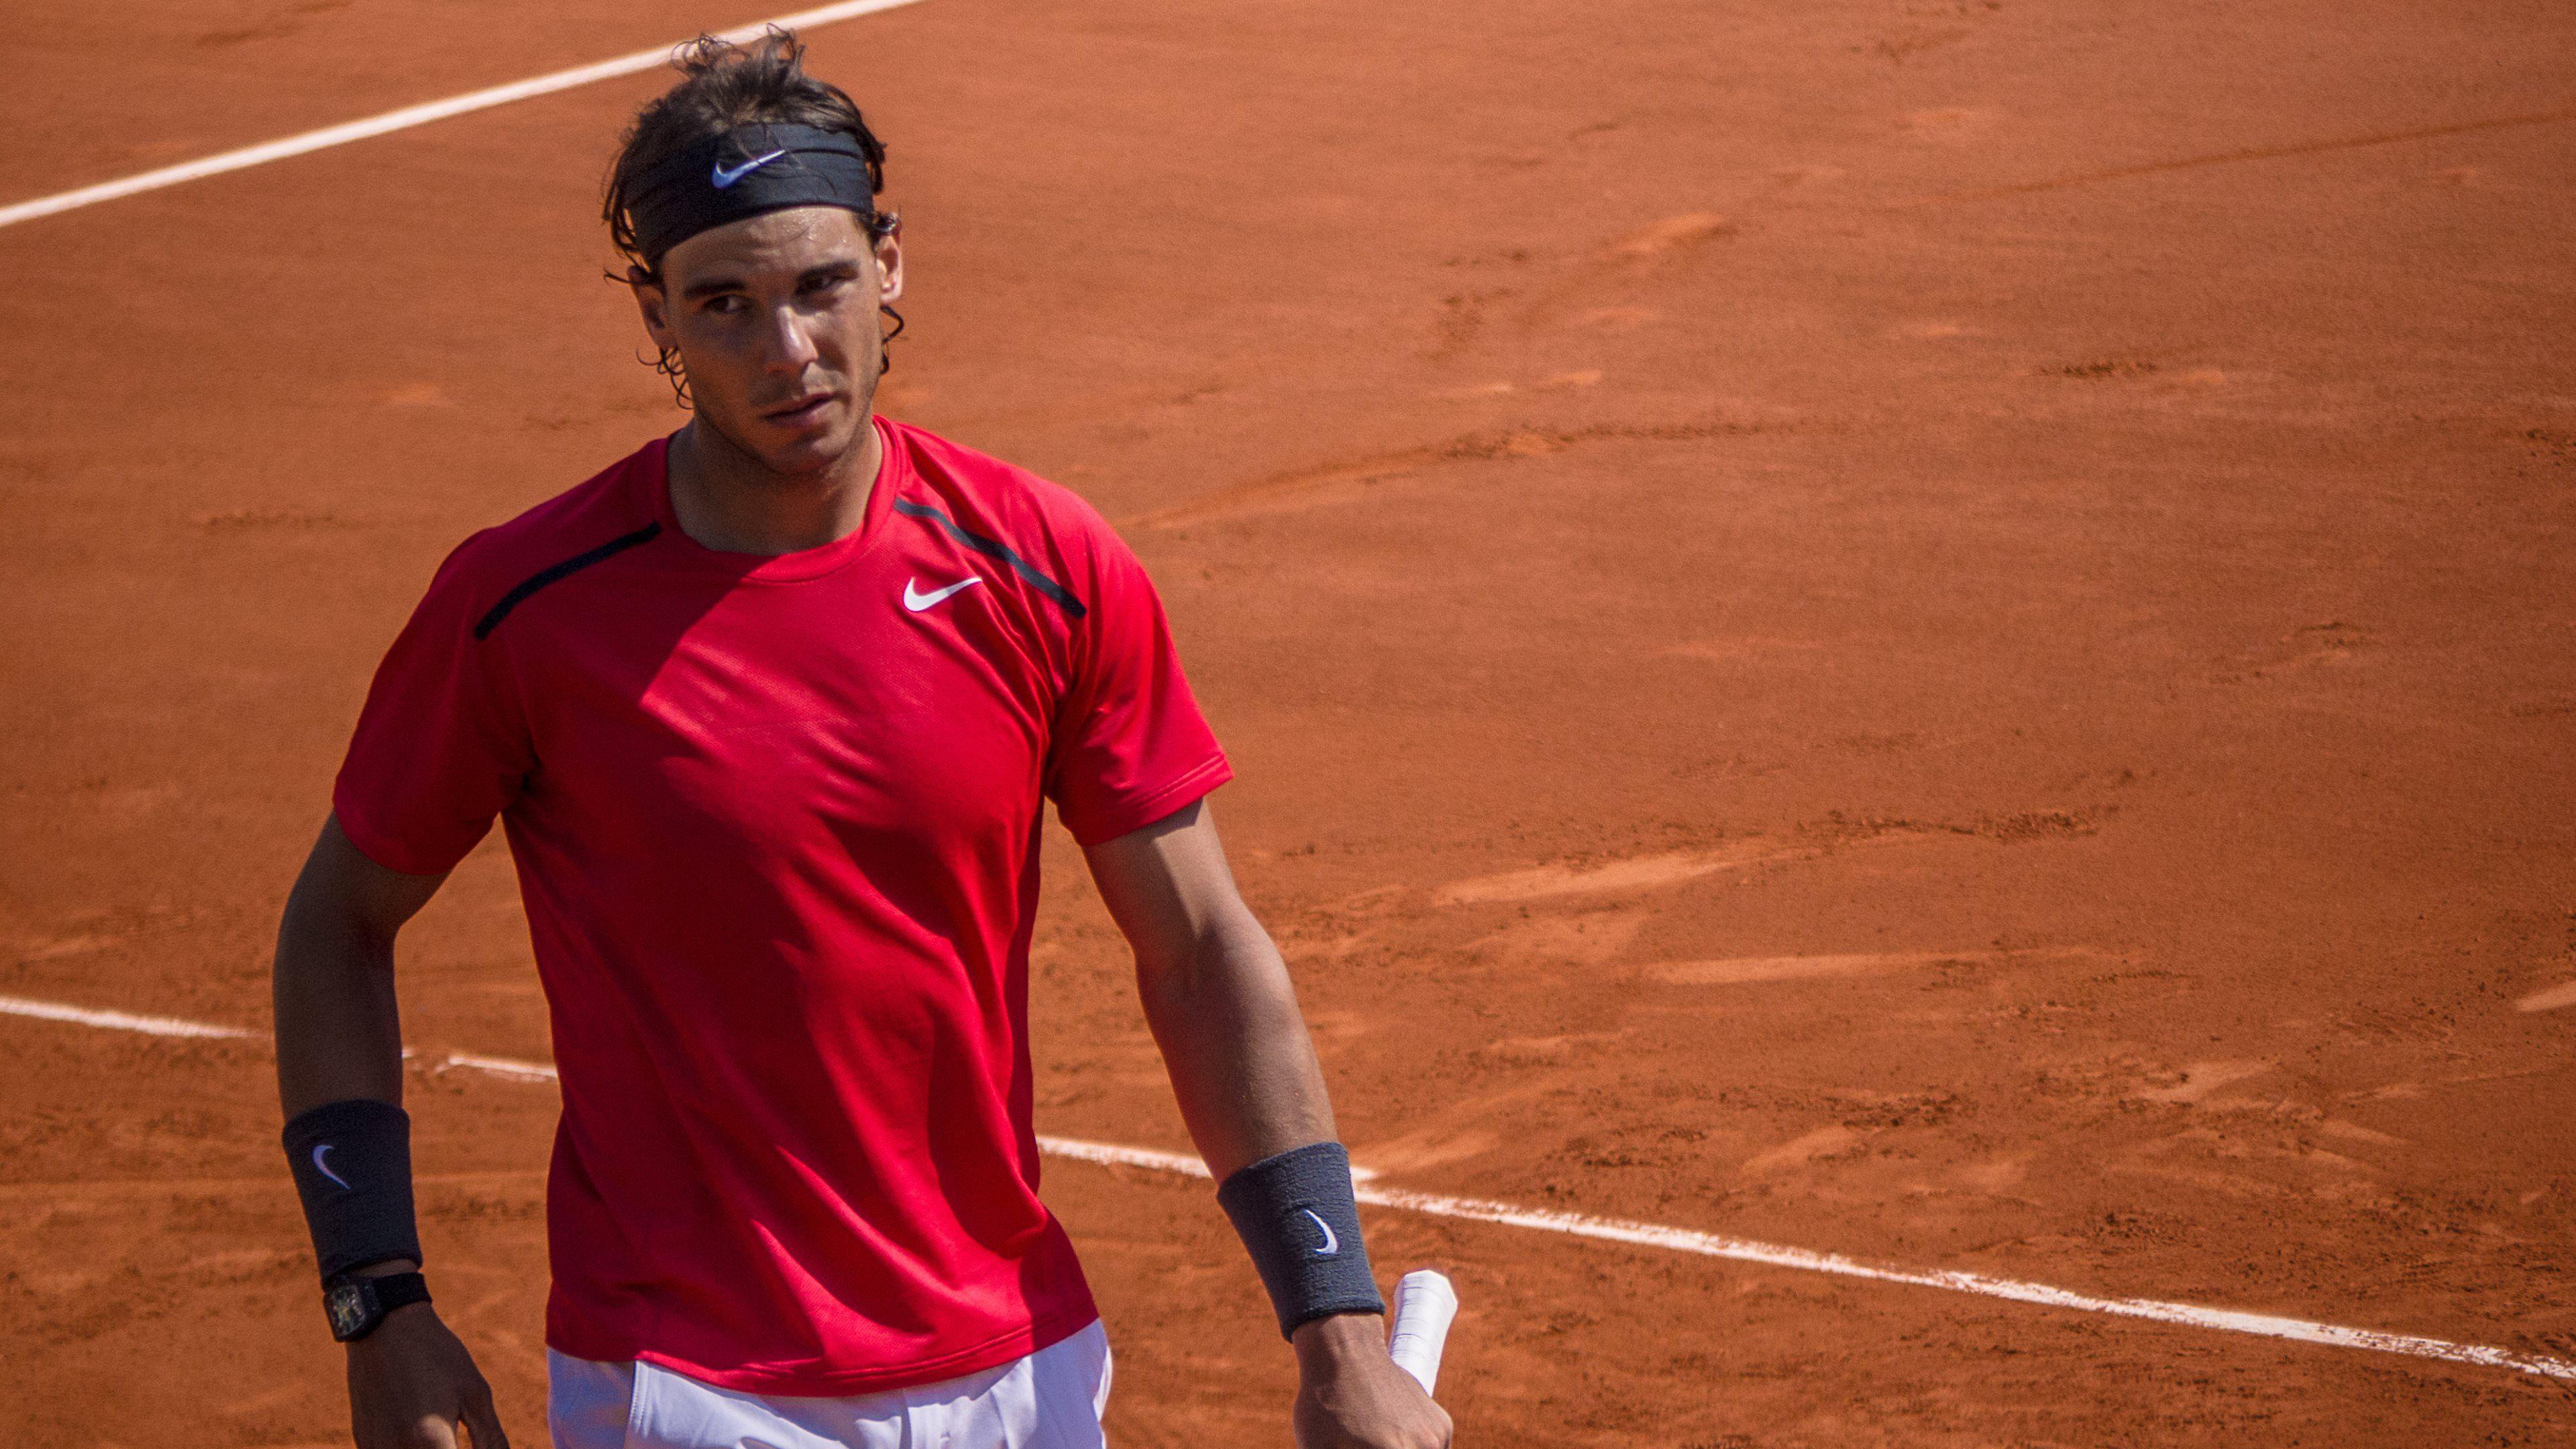 36+ Nadal Hd Wallpapers Pictures